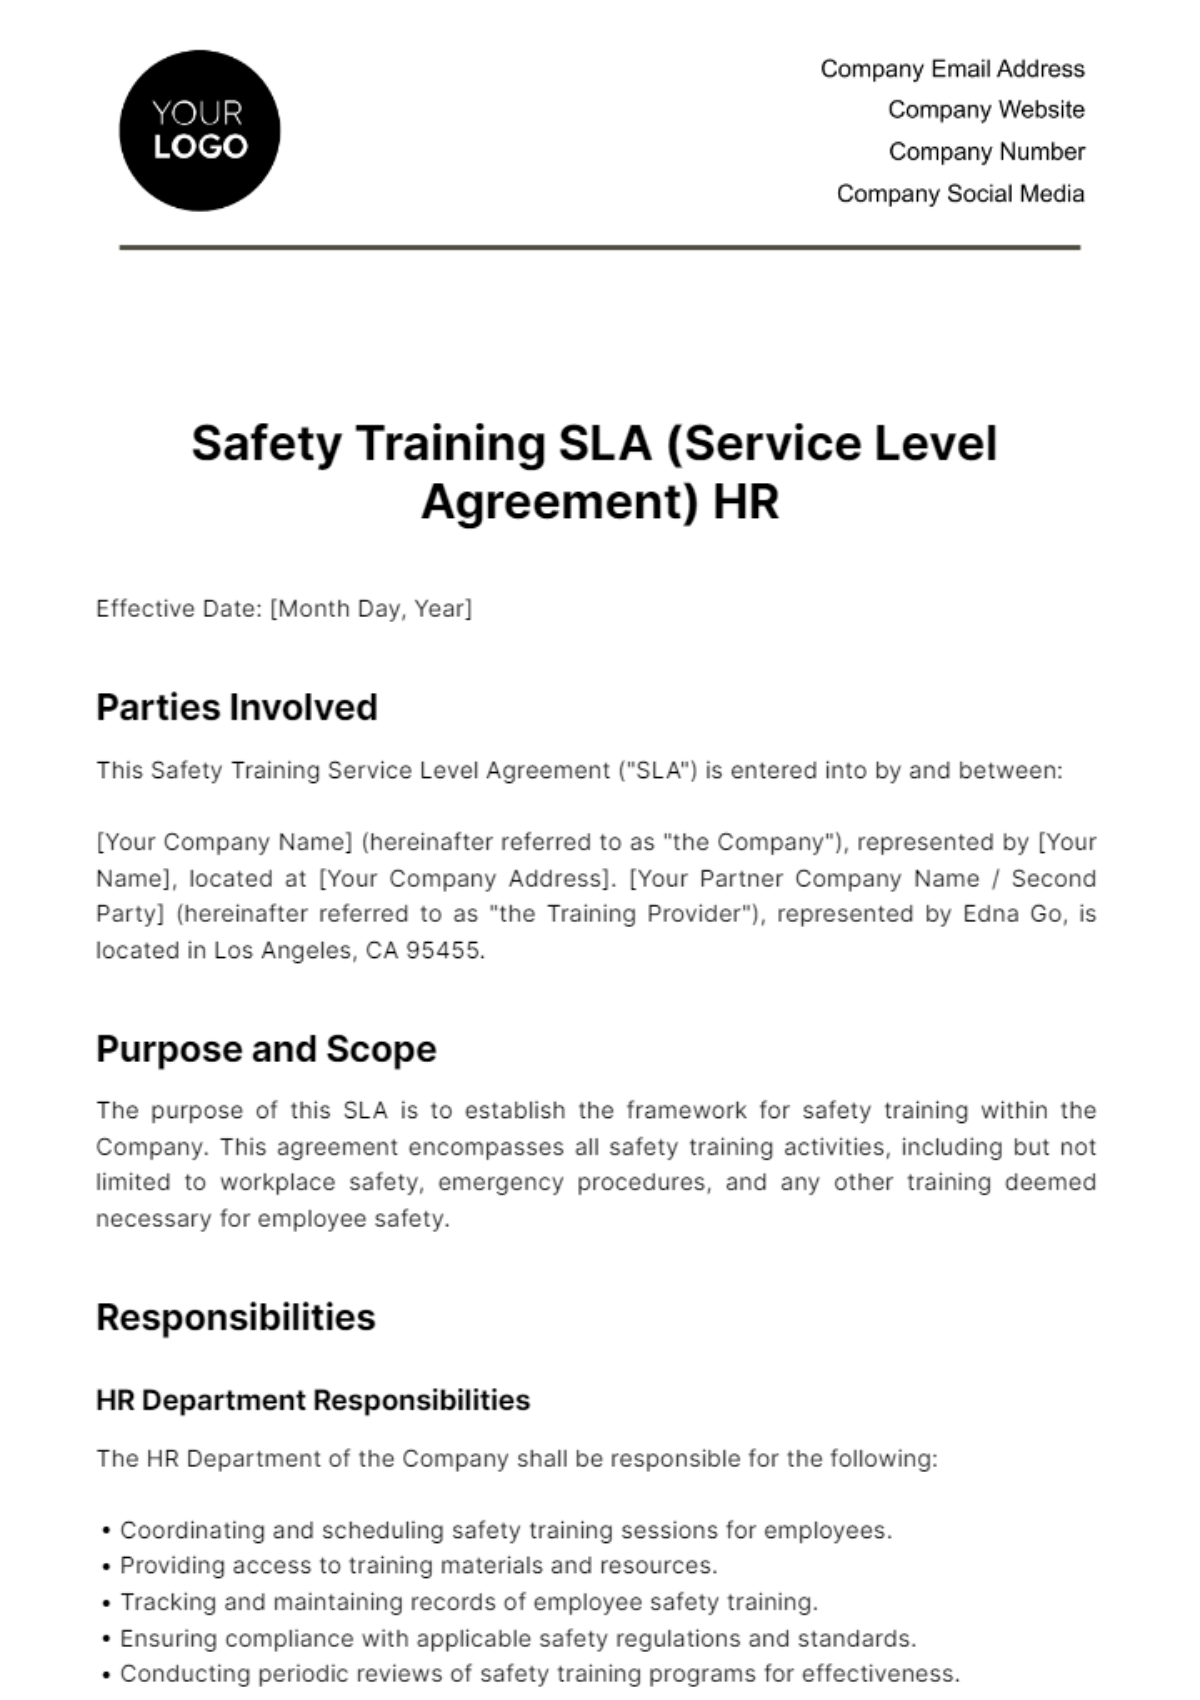 Free Safety Training SLA (Service Level Agreement) HR Template